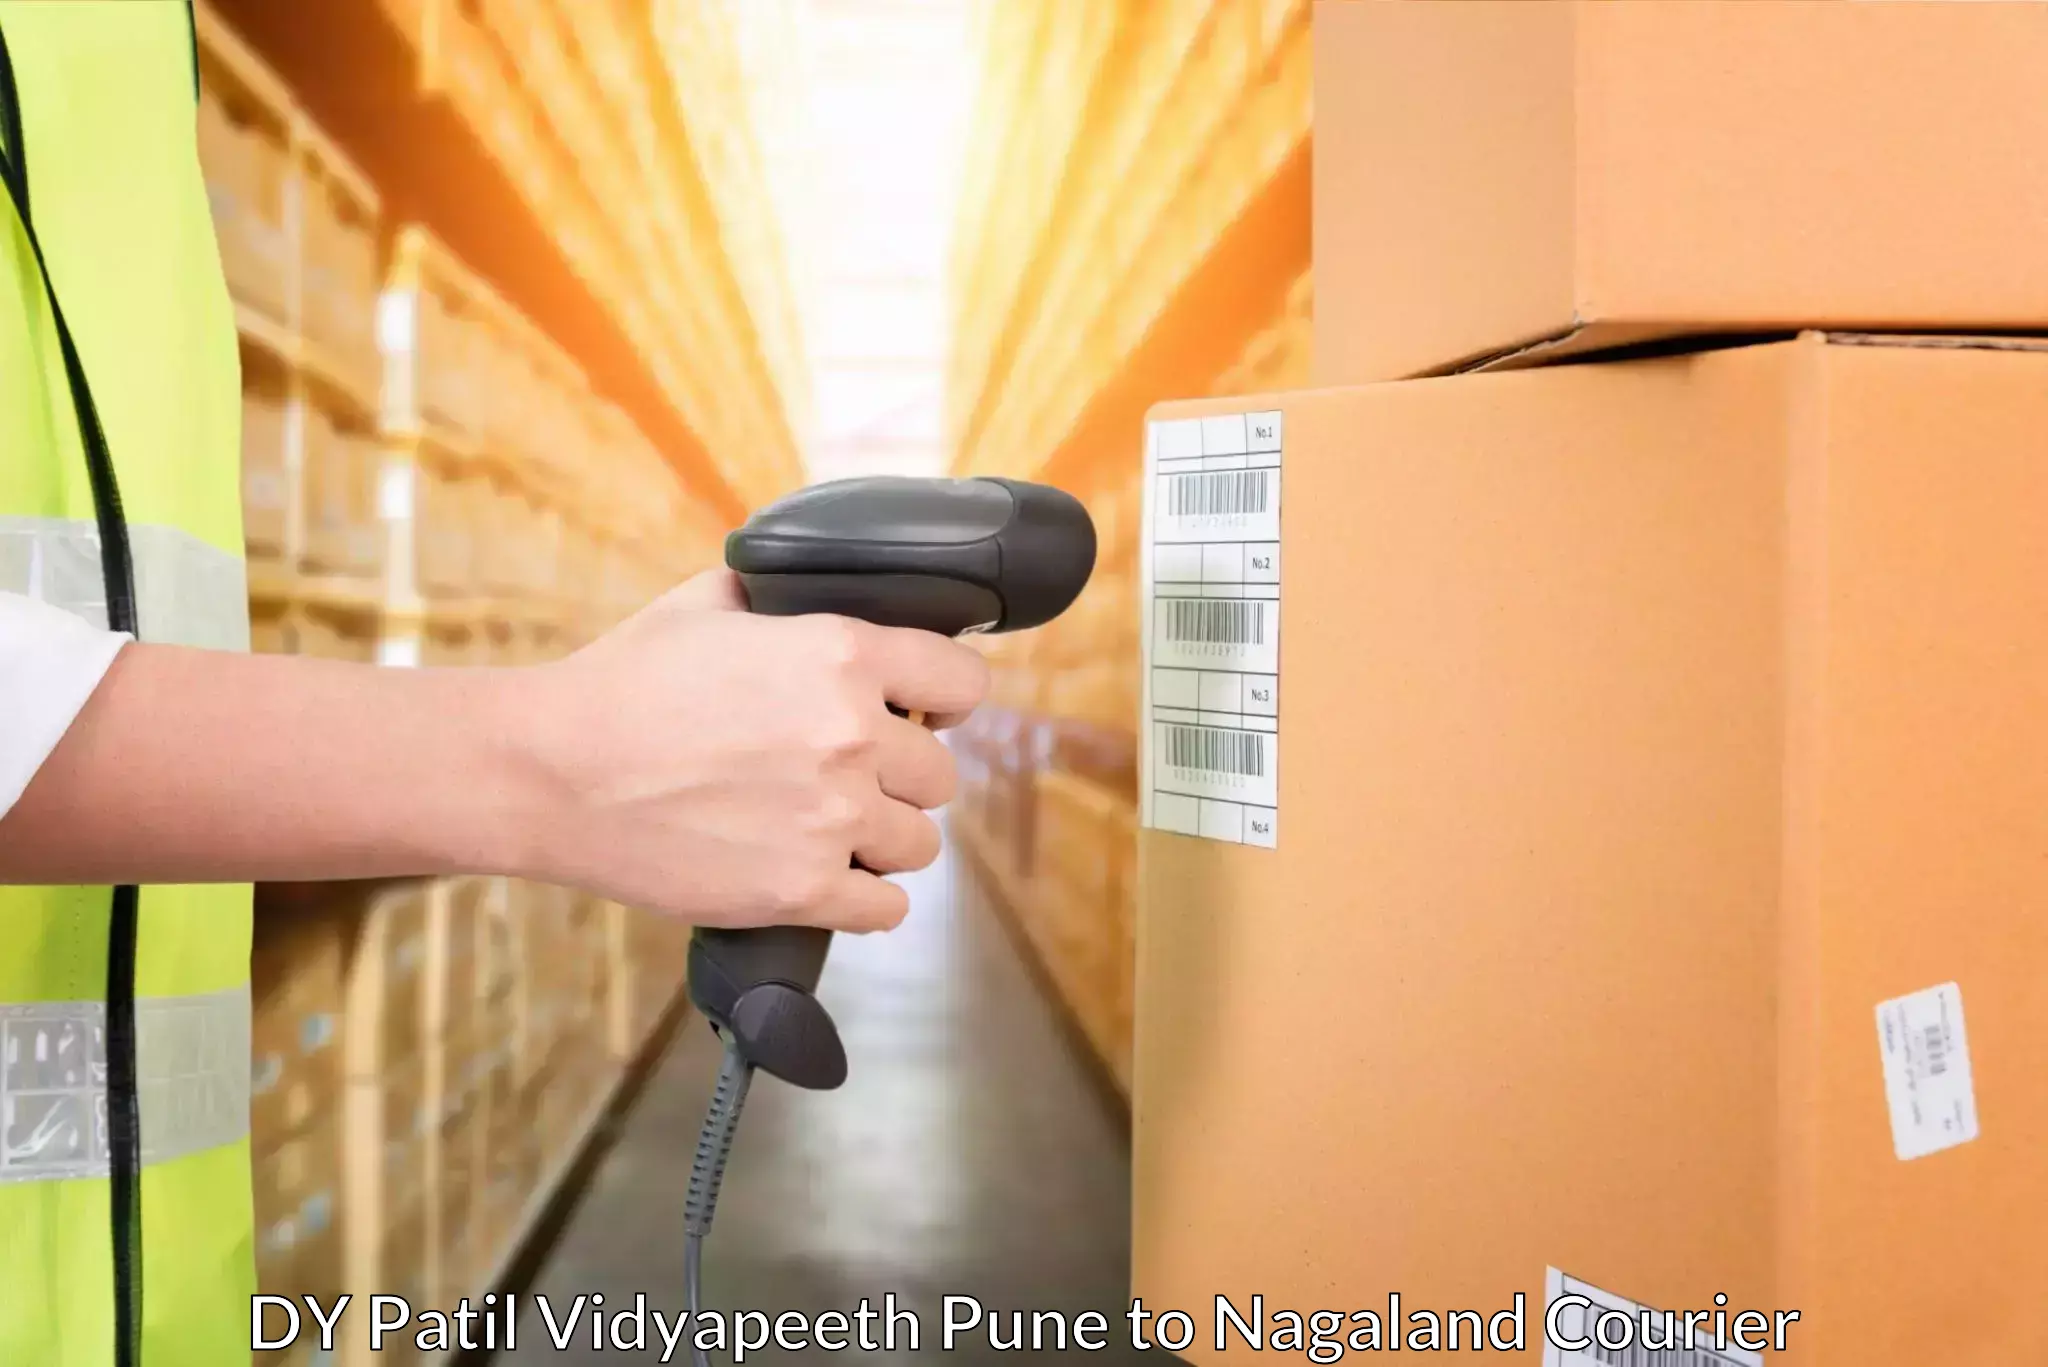 Global shipping networks DY Patil Vidyapeeth Pune to Nagaland